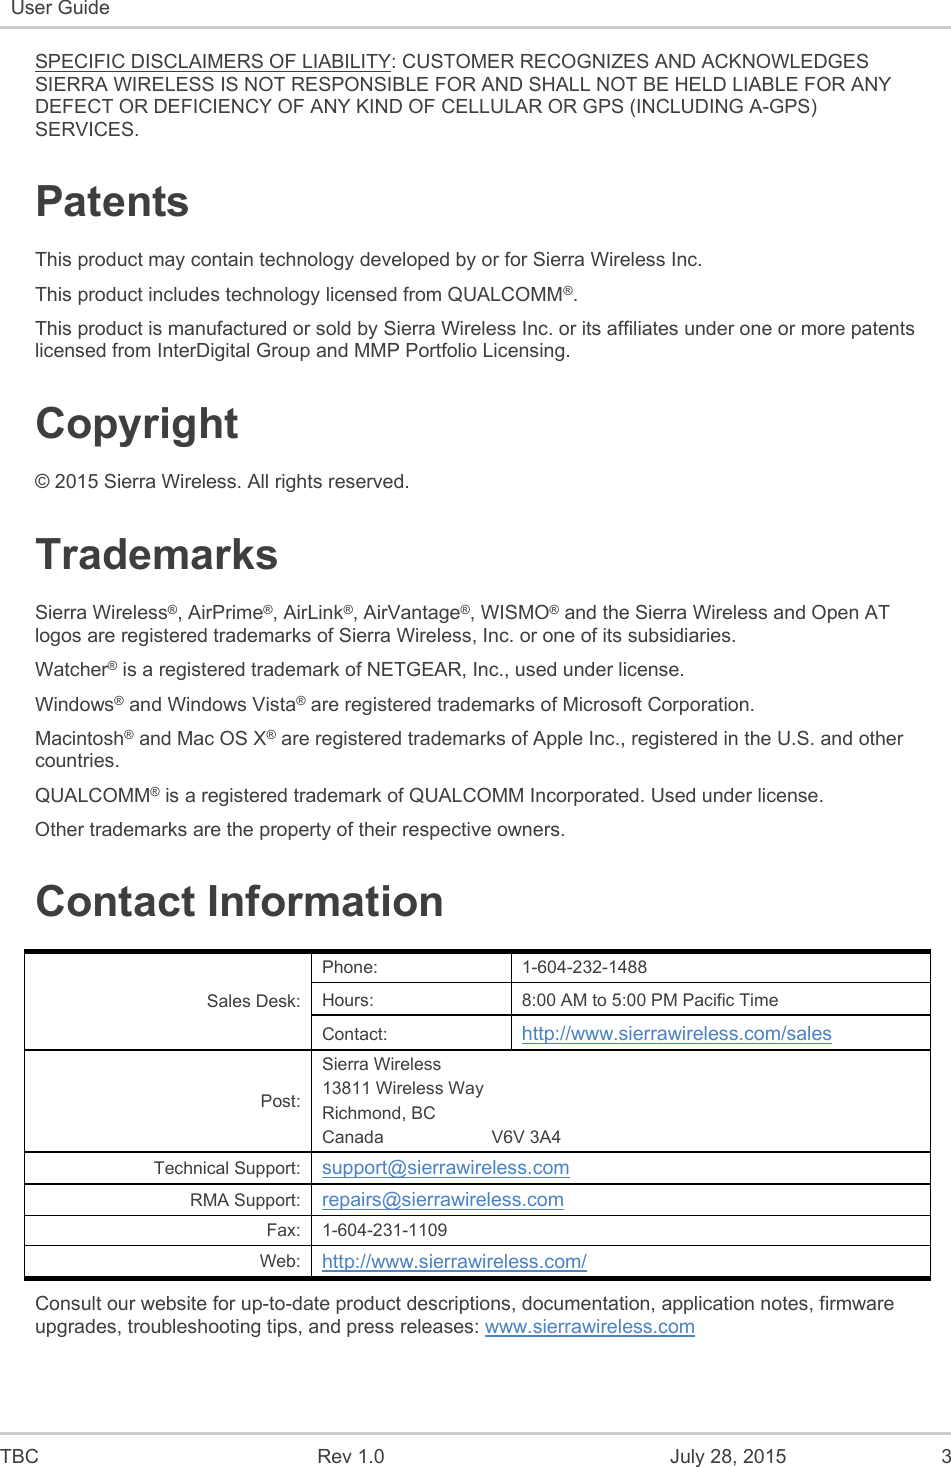  TBC  Rev 1.0  July 28, 2015  3 User Guide   SPECIFIC DISCLAIMERS OF LIABILITY: CUSTOMER RECOGNIZES AND ACKNOWLEDGES SIERRA WIRELESS IS NOT RESPONSIBLE FOR AND SHALL NOT BE HELD LIABLE FOR ANY DEFECT OR DEFICIENCY OF ANY KIND OF CELLULAR OR GPS (INCLUDING A-GPS) SERVICES. Patents This product may contain technology developed by or for Sierra Wireless Inc. This product includes technology licensed from QUALCOMM®. This product is manufactured or sold by Sierra Wireless Inc. or its affiliates under one or more patents licensed from InterDigital Group and MMP Portfolio Licensing. Copyright © 2015 Sierra Wireless. All rights reserved. Trademarks Sierra Wireless®, AirPrime®, AirLink®, AirVantage®, WISMO® and the Sierra Wireless and Open AT logos are registered trademarks of Sierra Wireless, Inc. or one of its subsidiaries. Watcher® is a registered trademark of NETGEAR, Inc., used under license. Windows® and Windows Vista® are registered trademarks of Microsoft Corporation. Macintosh® and Mac OS X® are registered trademarks of Apple Inc., registered in the U.S. and other countries. QUALCOMM® is a registered trademark of QUALCOMM Incorporated. Used under license. Other trademarks are the property of their respective owners. Contact Information Sales Desk: Phone:  1-604-232-1488 Hours:  8:00 AM to 5:00 PM Pacific Time Contact:  http://www.sierrawireless.com/sales Post: Sierra Wireless 13811 Wireless Way Richmond, BC Canada                      V6V 3A4 Technical Support:  support@sierrawireless.com RMA Support:  repairs@sierrawireless.com Fax:  1-604-231-1109 Web:  http://www.sierrawireless.com/ Consult our website for up-to-date product descriptions, documentation, application notes, firmware upgrades, troubleshooting tips, and press releases: www.sierrawireless.com 